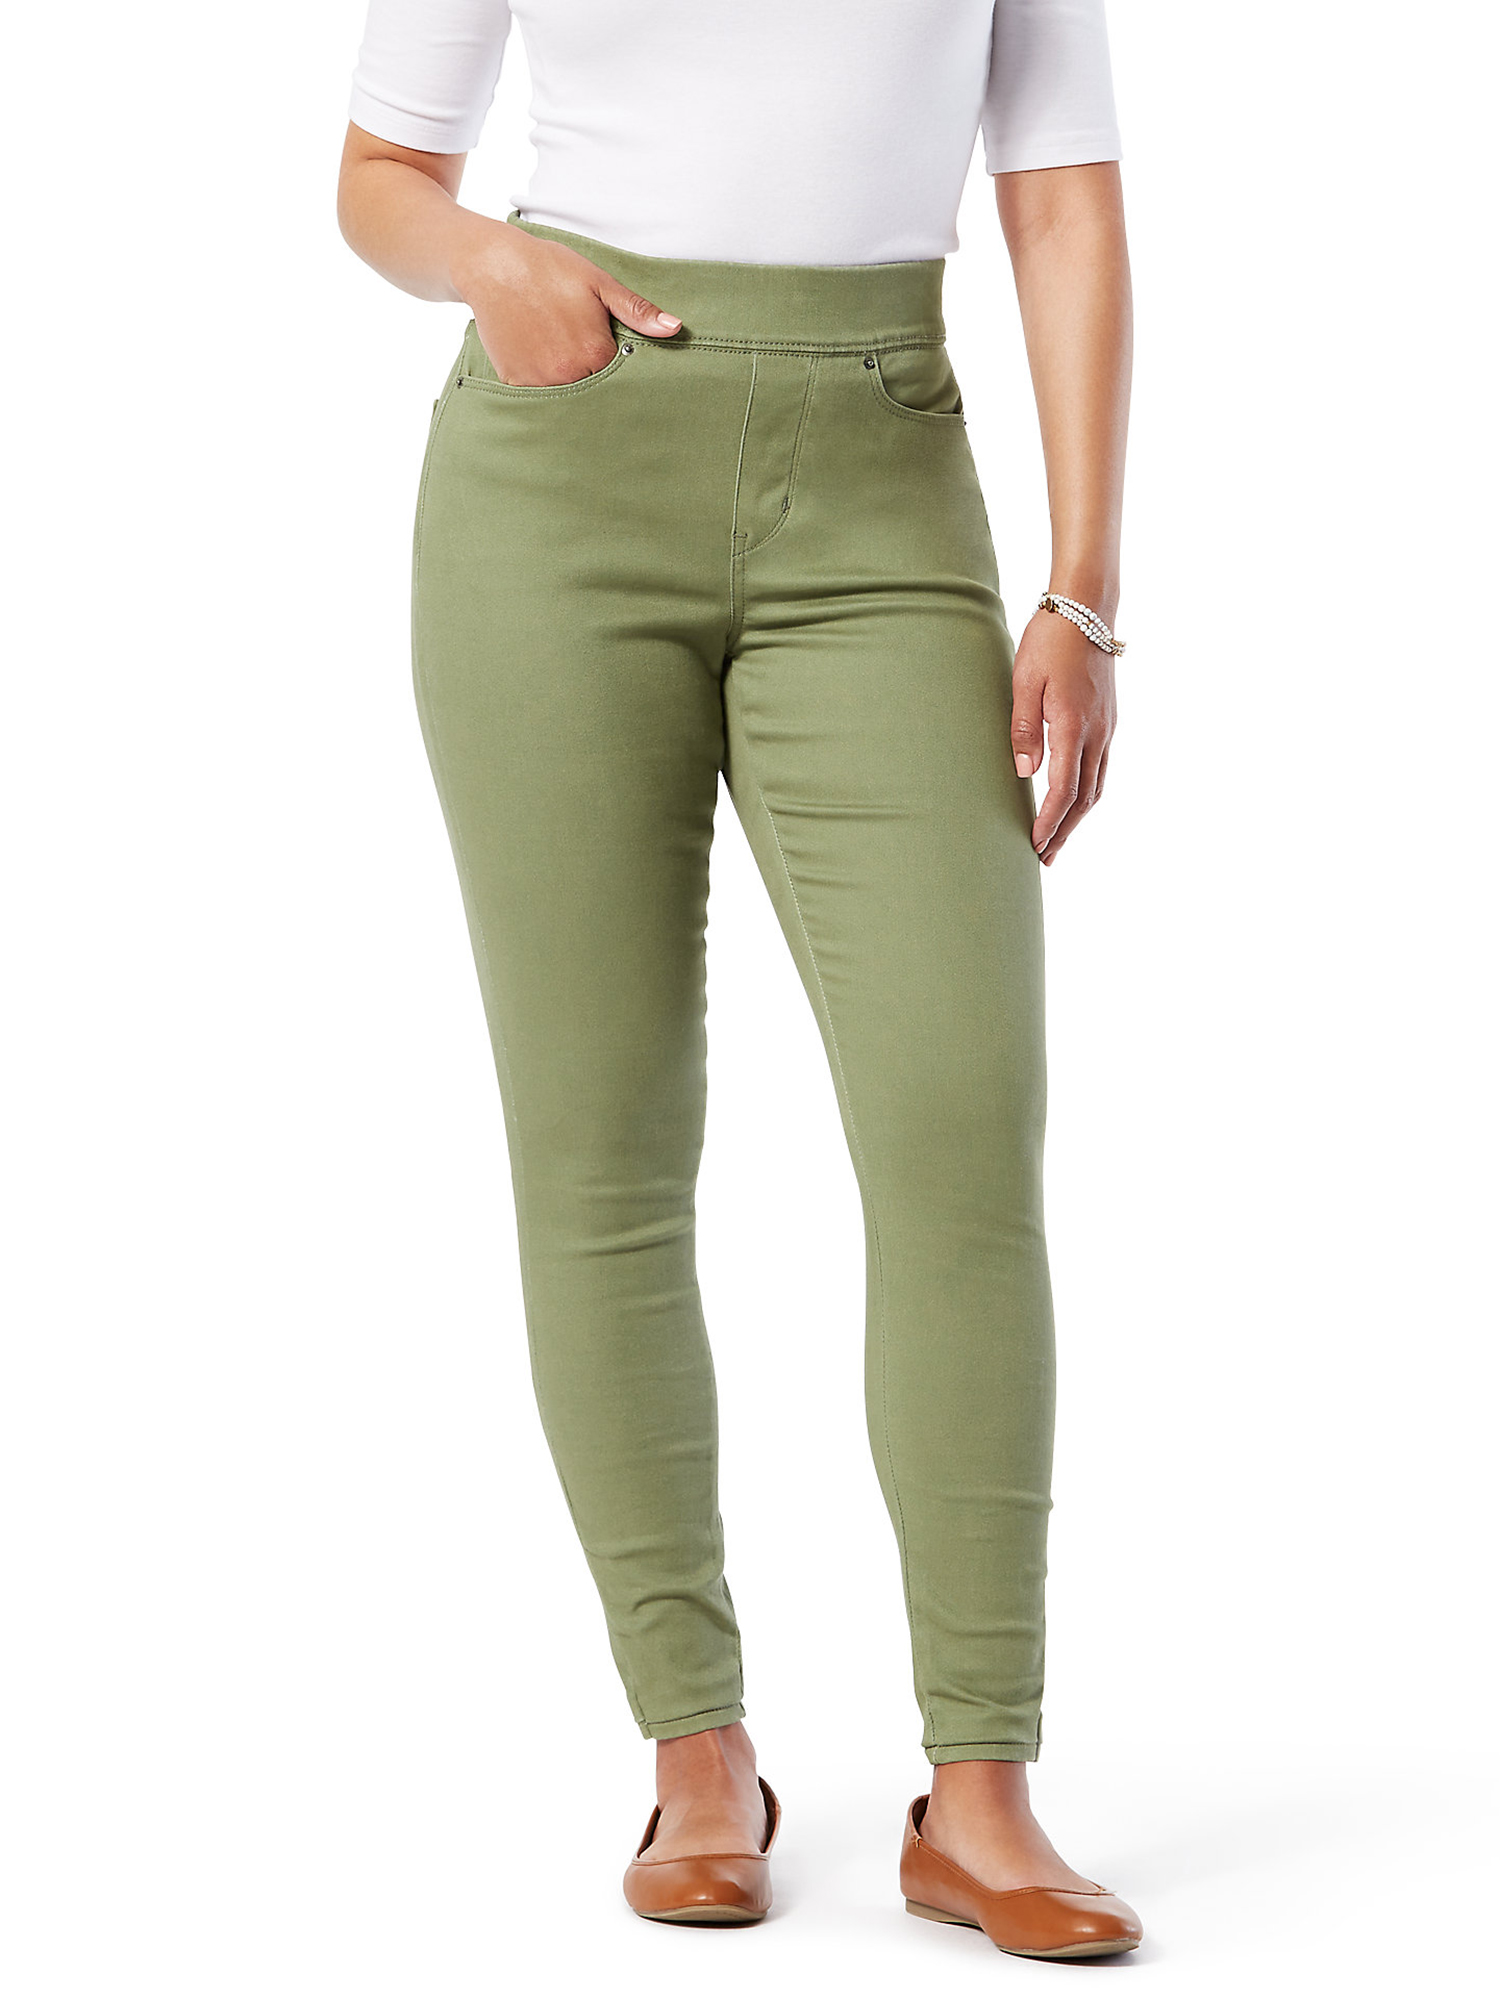 Signature by Levi Strauss & Co. Women's Simply Stretch Shaping Pull-On Super Skinny Jeans - image 1 of 4